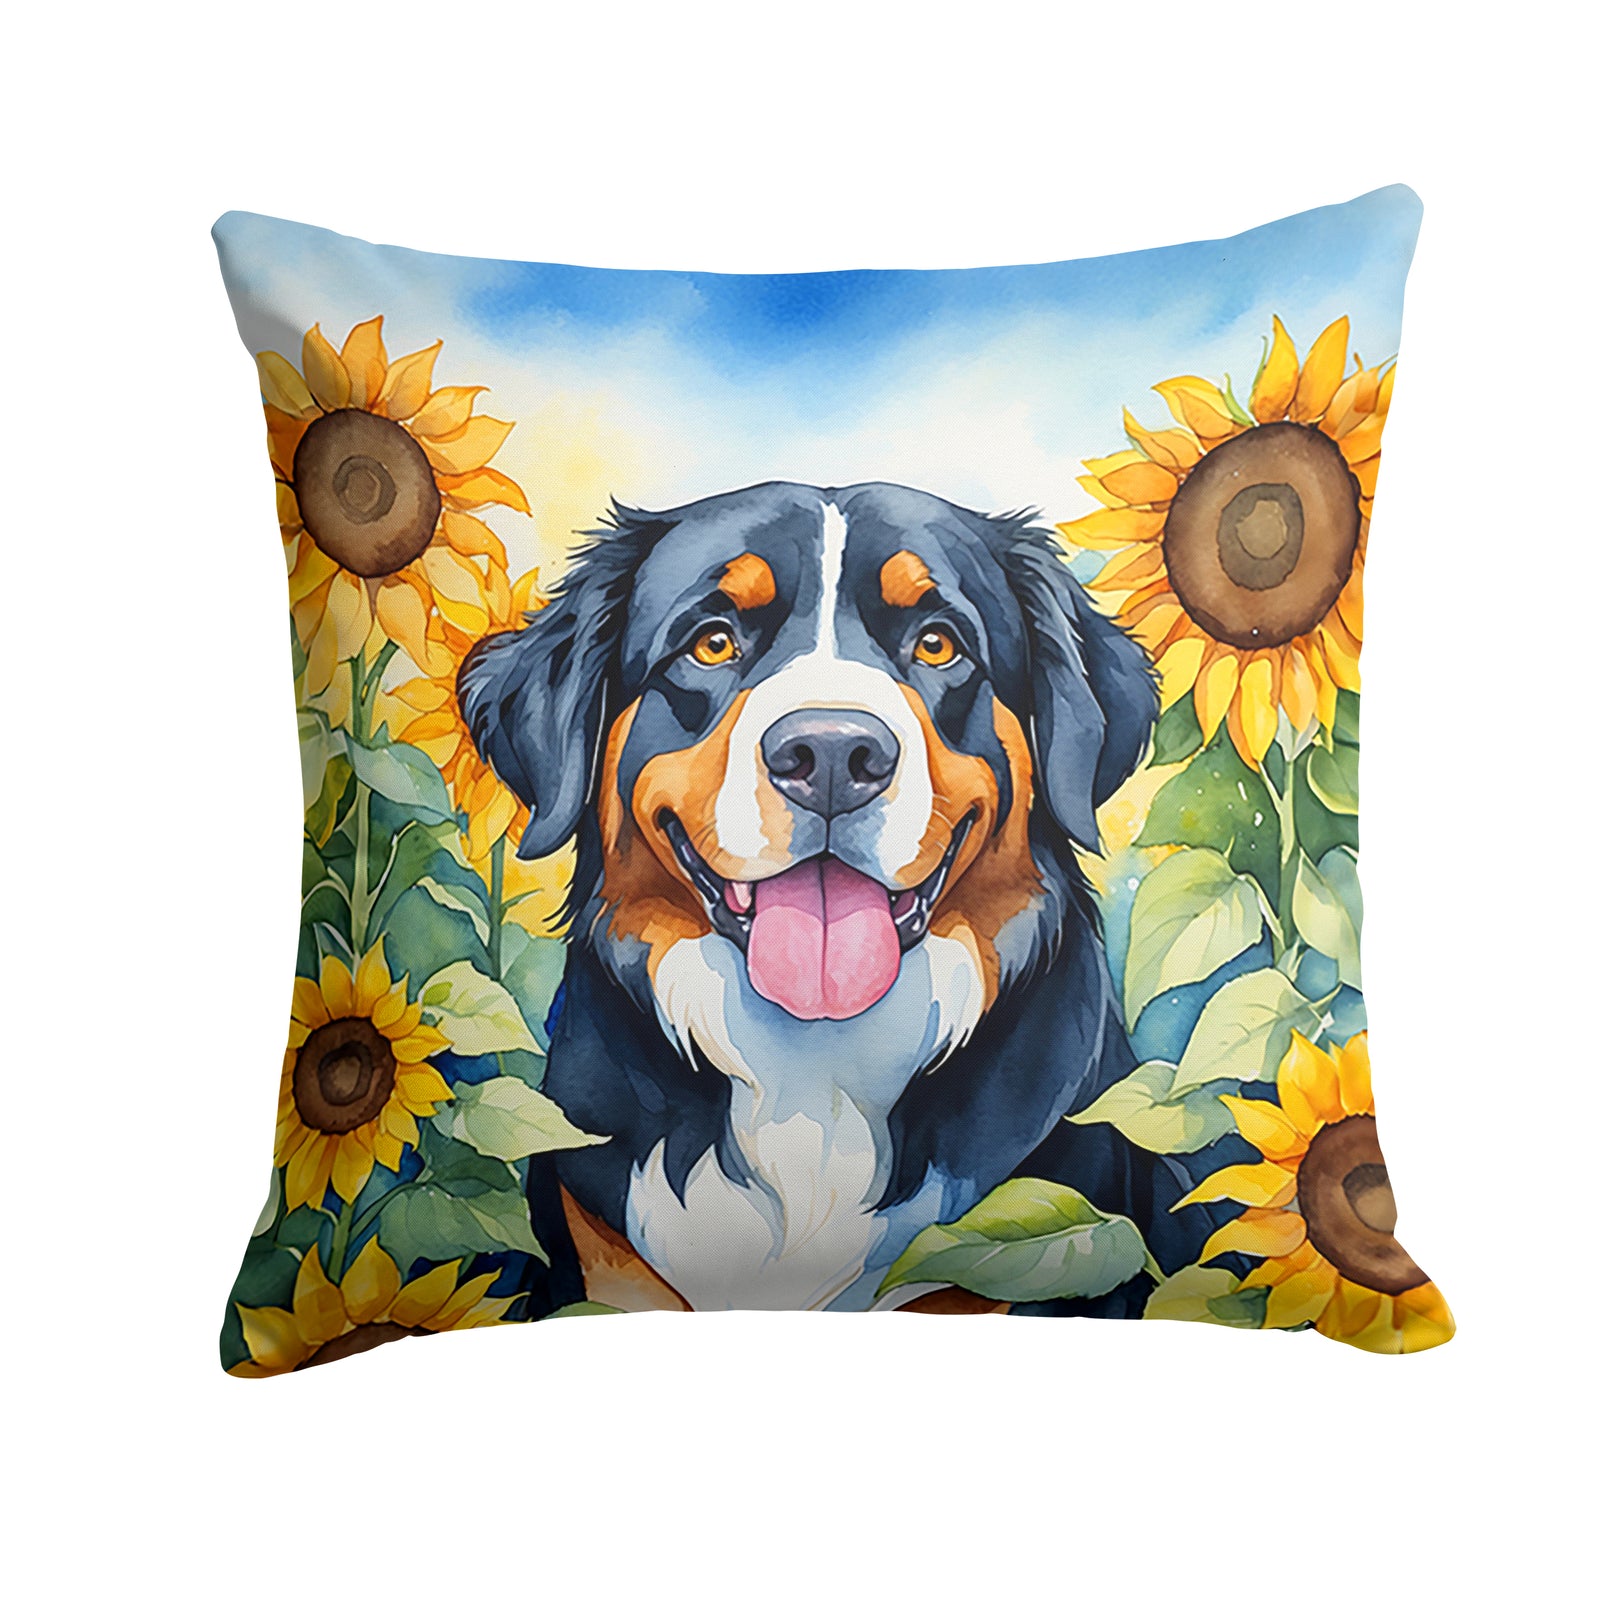 Buy this Bernese Mountain Dog in Sunflowers Throw Pillow